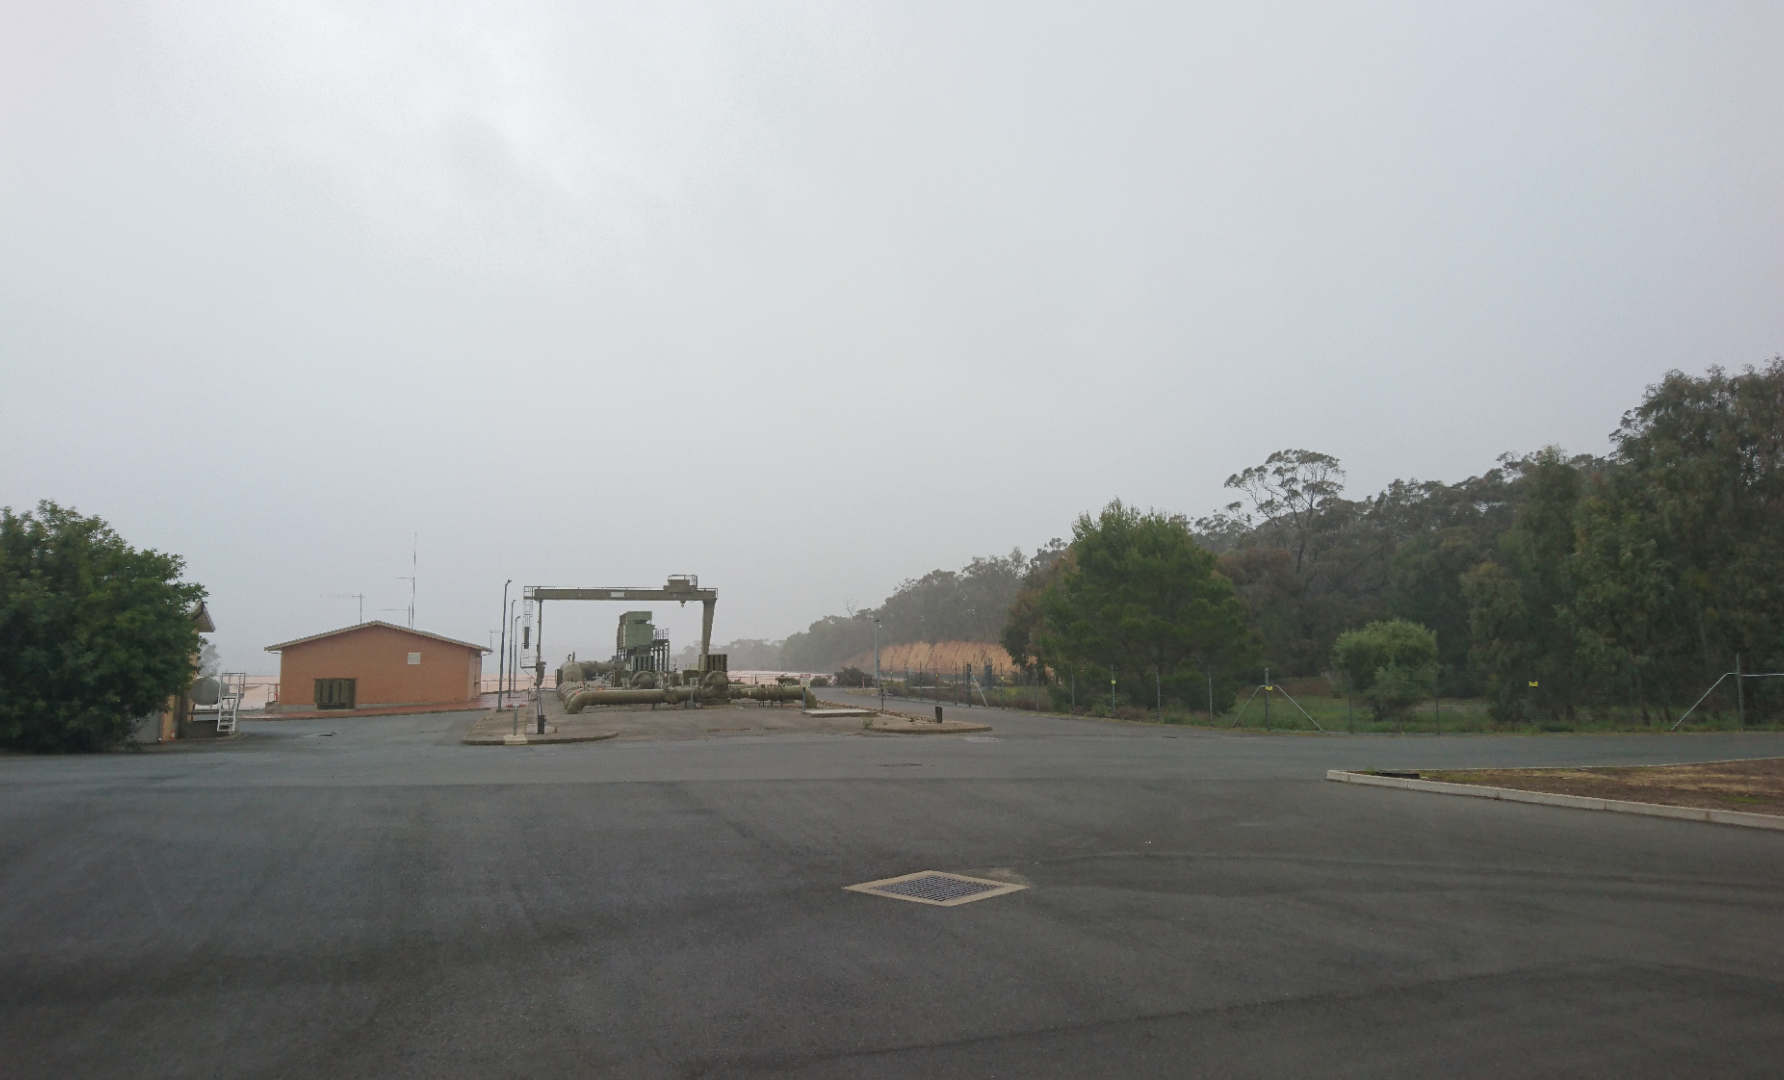 Water Treatment Plant during foggy and wild weather